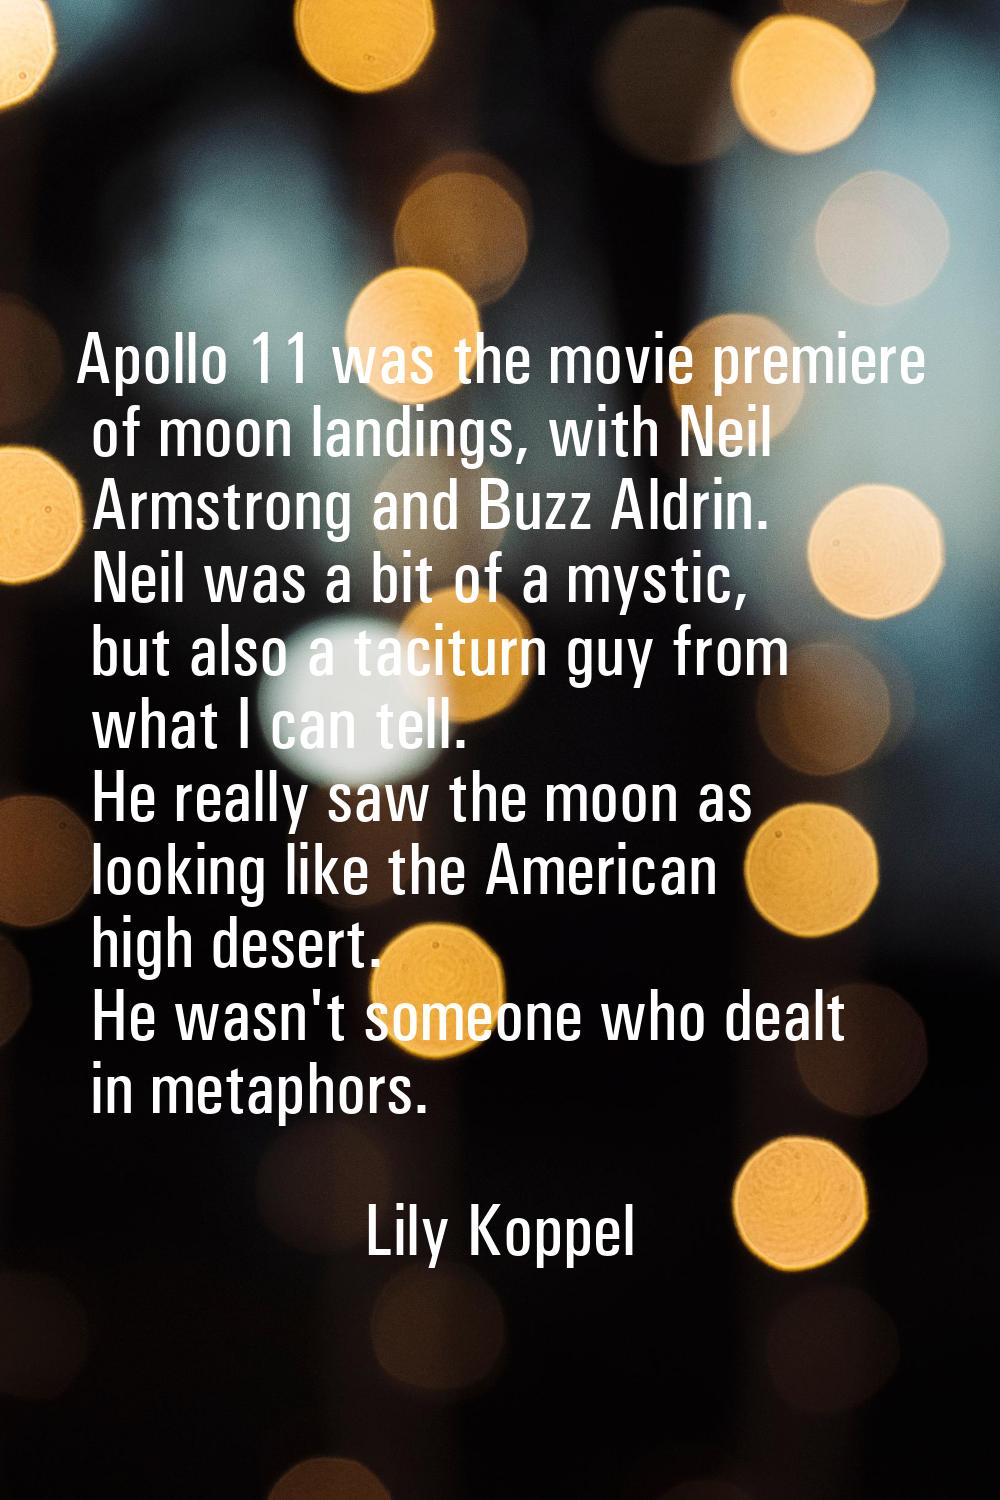 Apollo 11 was the movie premiere of moon landings, with Neil Armstrong and Buzz Aldrin. Neil was a 